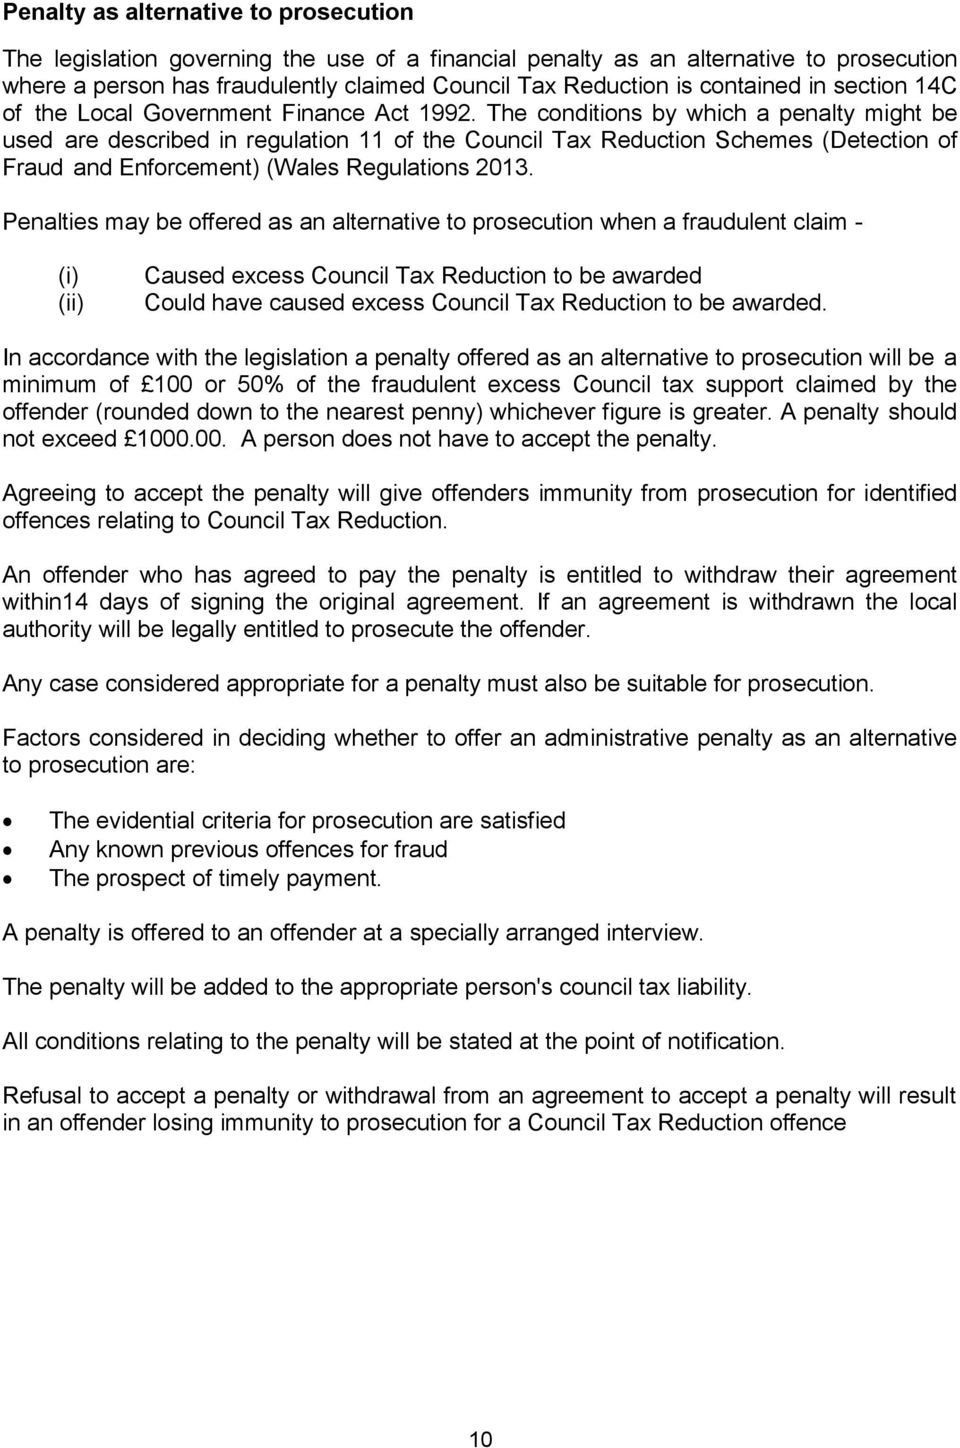 The conditions by which a penalty might be used are described in regulation 11 of the Council Tax Reduction Schemes (Detection of Fraud and Enforcement) (Wales Regulations 2013.